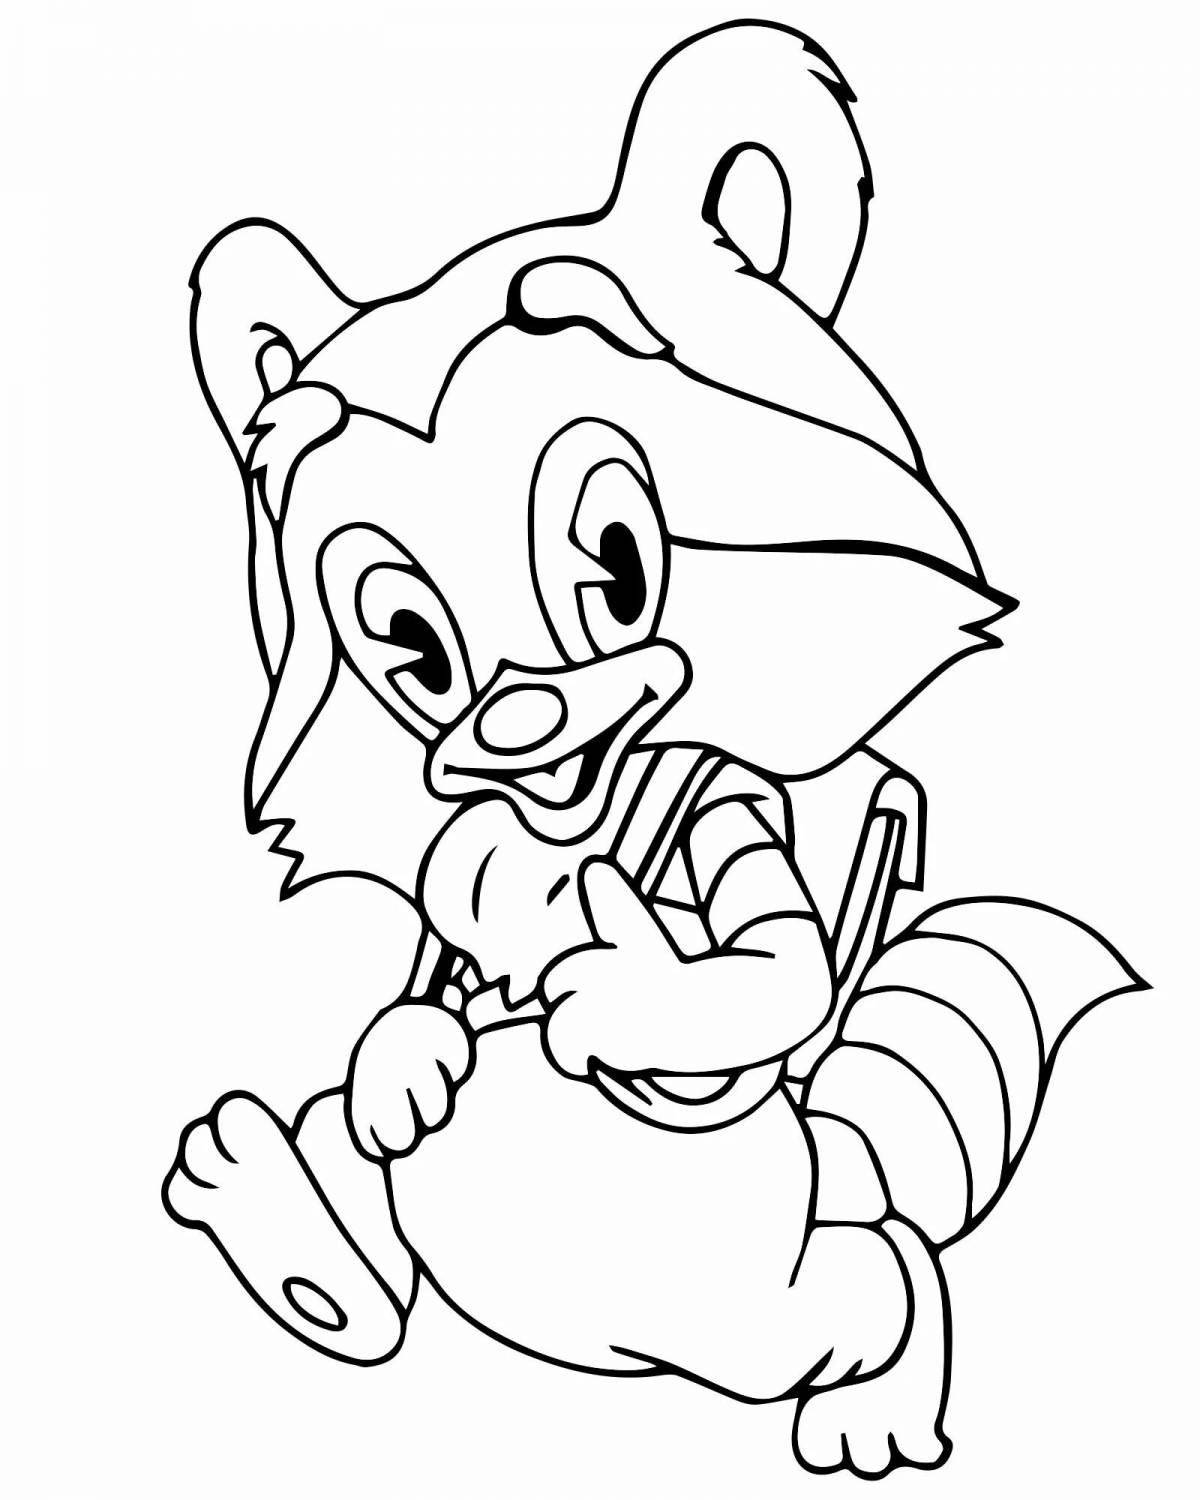 Coloring page of a cheerful cartoon character